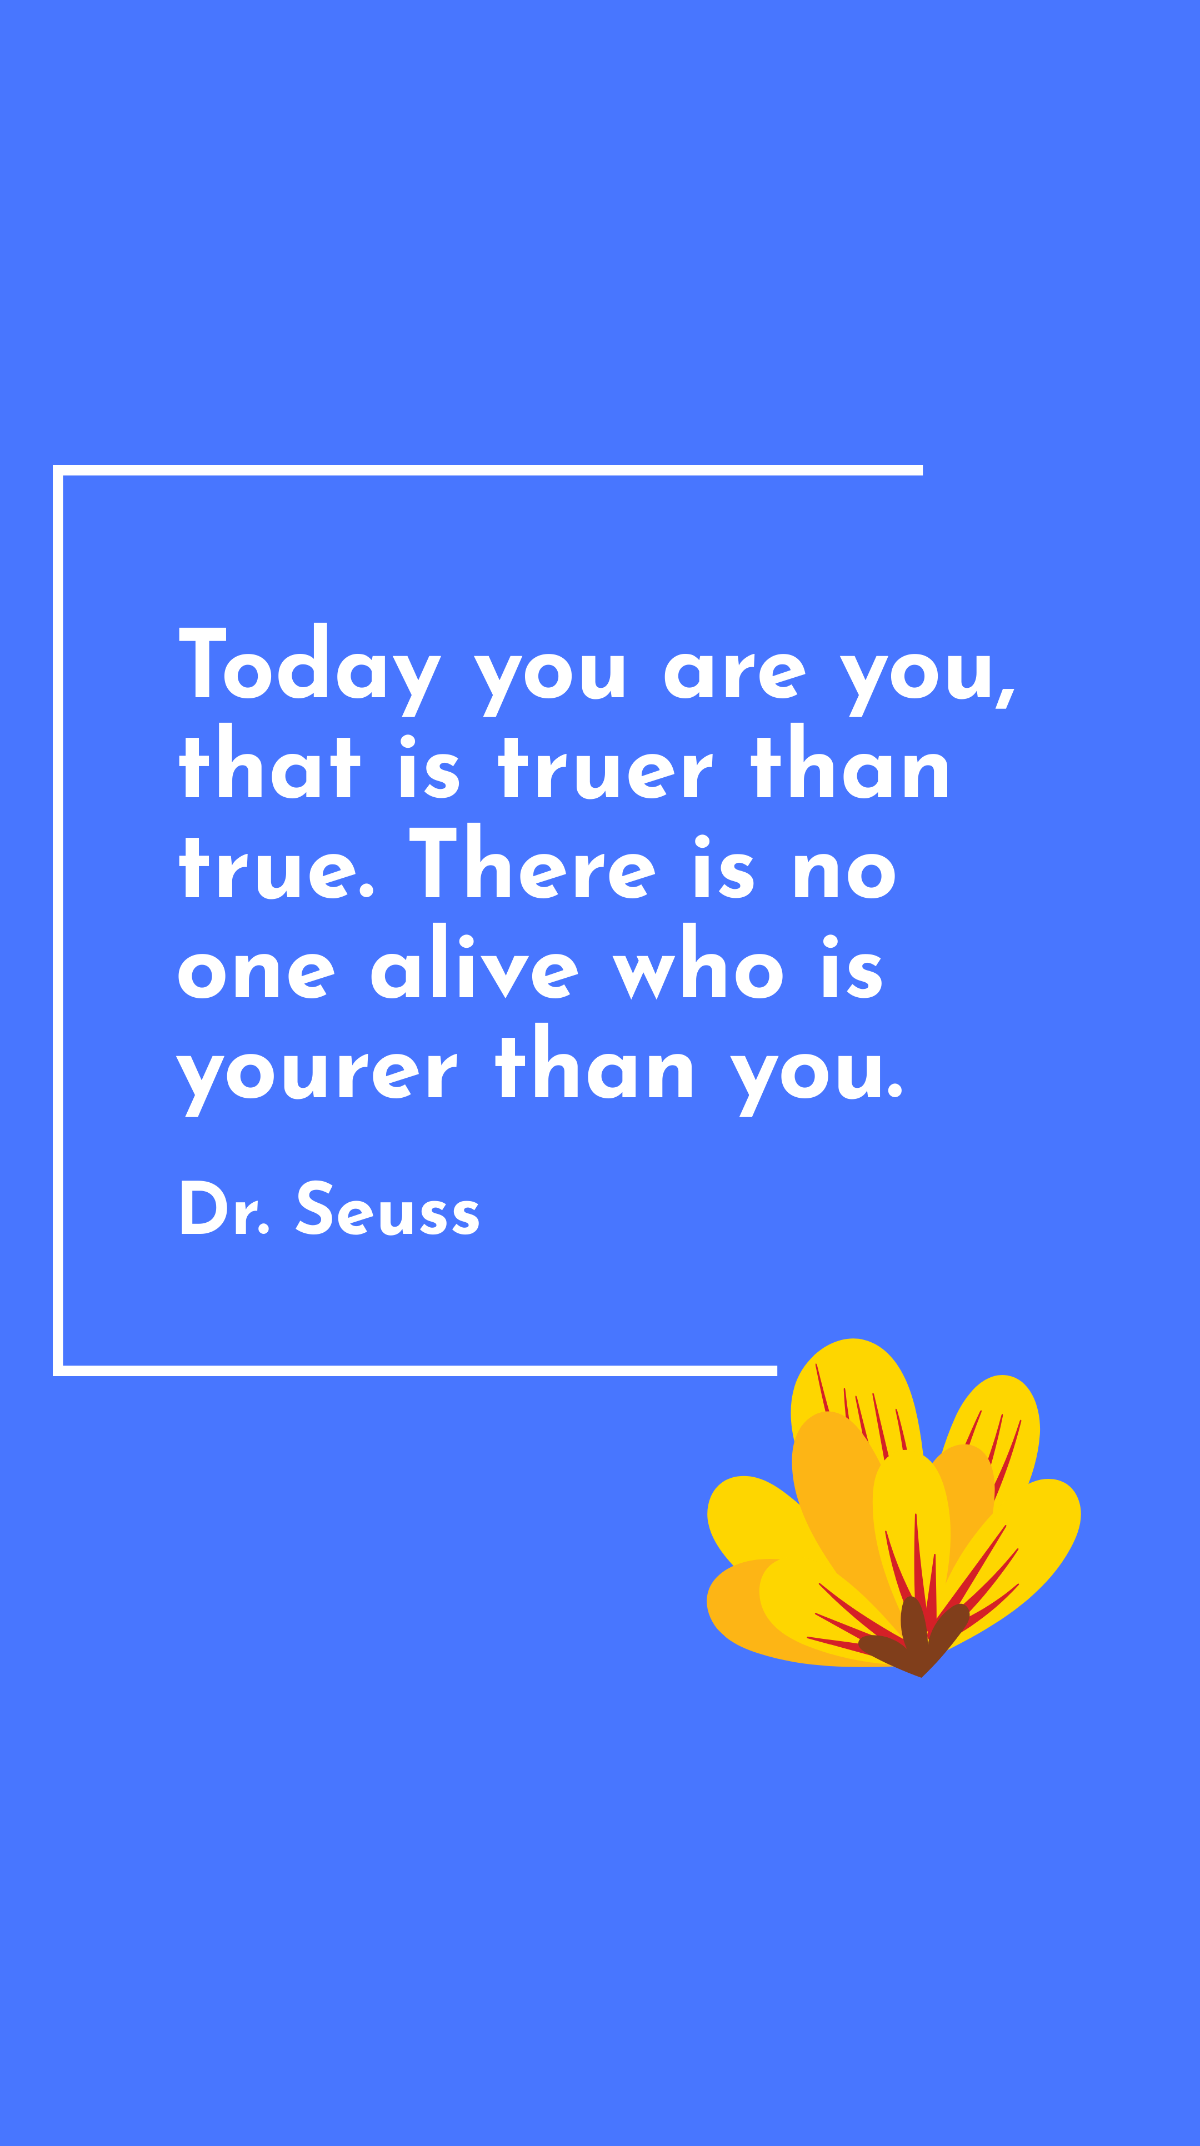 Dr. Seuss - Today you are you, that is truer than true. There is no one alive who is yourer than you. Template